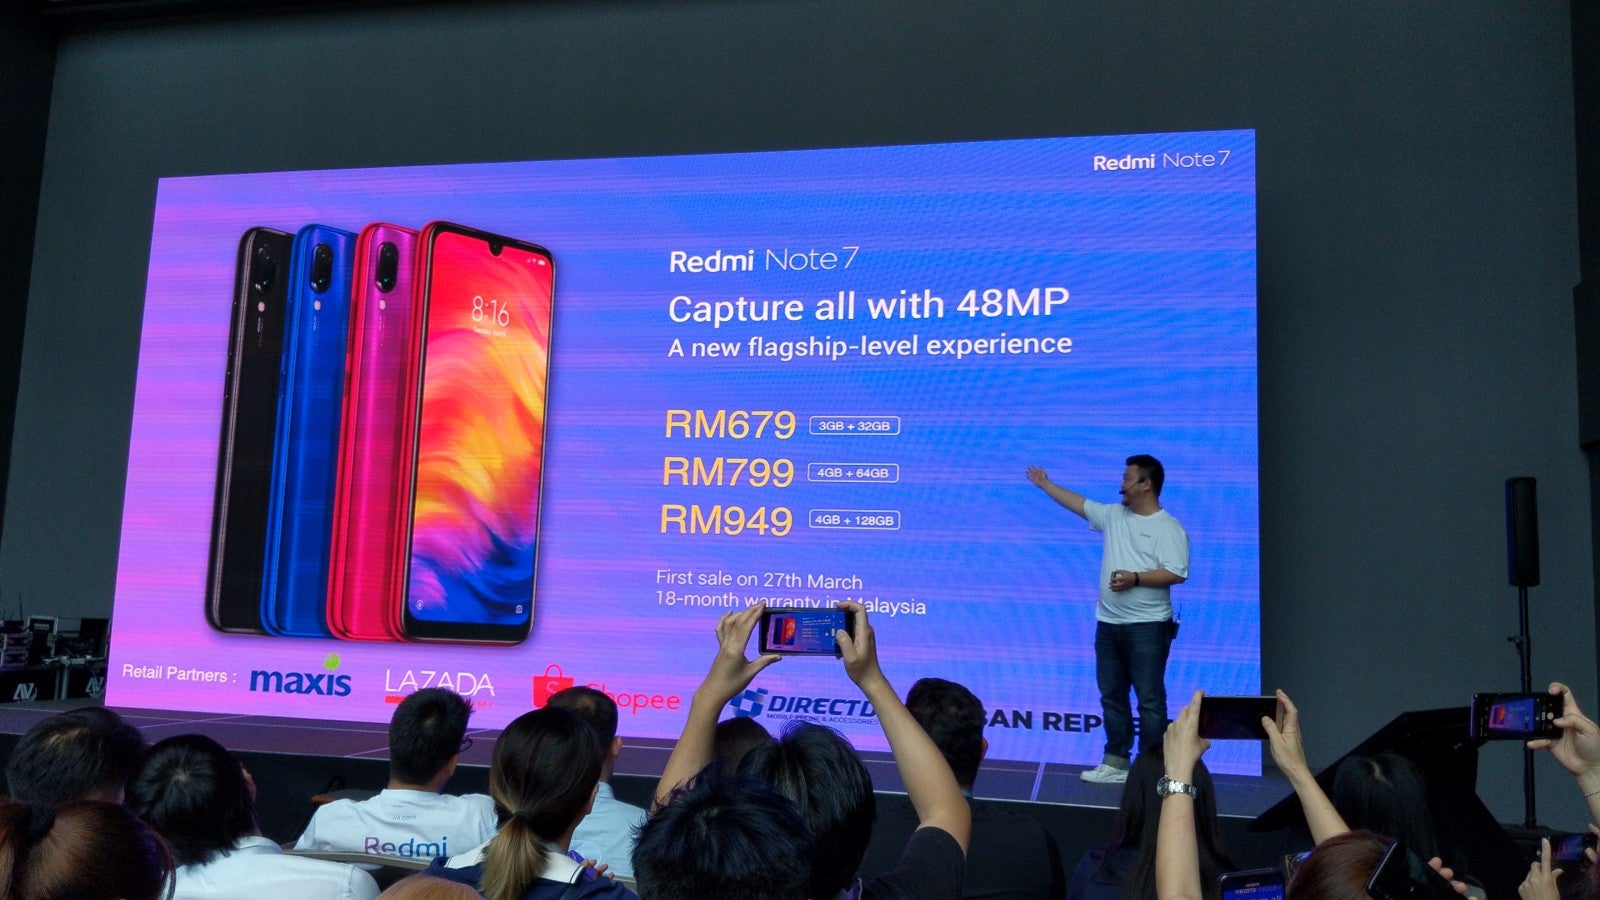 This New Redmi Phone Has a 48MP Camera, 4000mAH Battery, and Costs Only RM679! - WORLD OF BUZZ 3